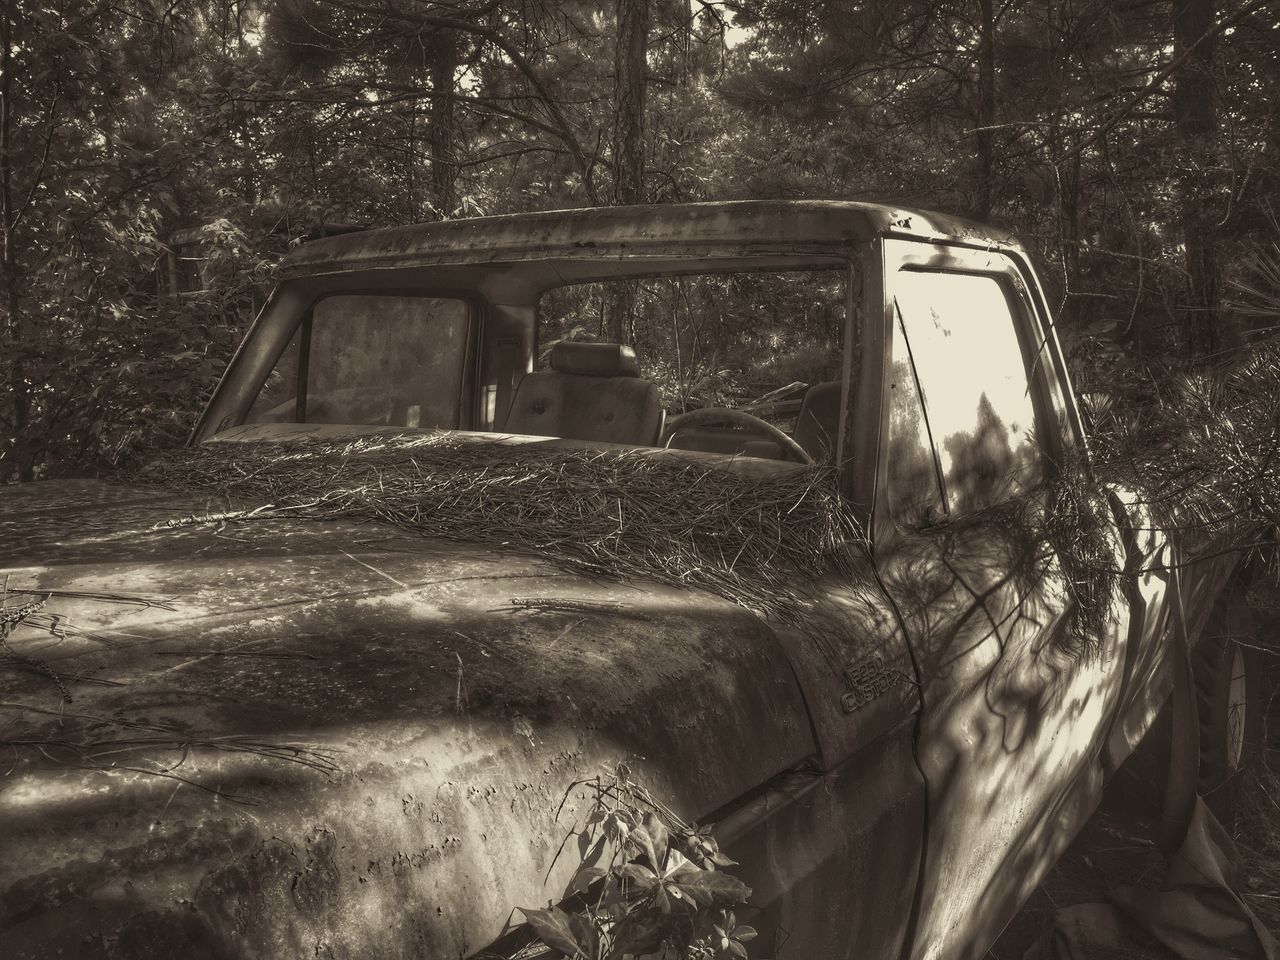 land vehicle, car, transportation, mode of transport, close-up, glass - material, abandoned, obsolete, old, damaged, tree, day, reflection, part of, old-fashioned, outdoors, window, metal, no people, transparent